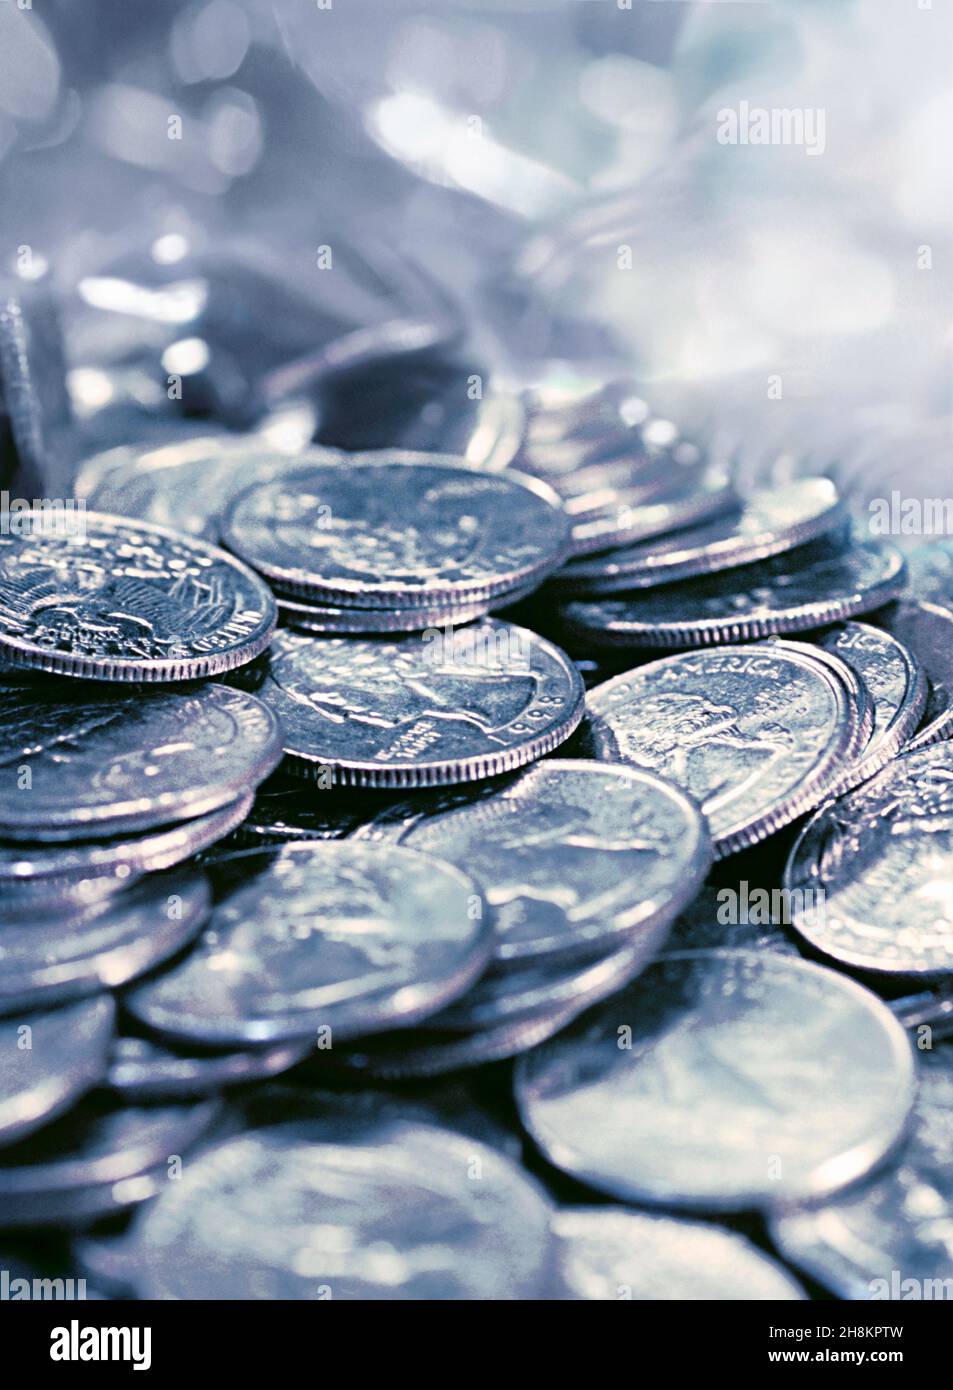 Silver coins. Pile of silver coins.Saving money. American quarters in a pile. Small change. Savings for a rainy day. Still life Stock Photo